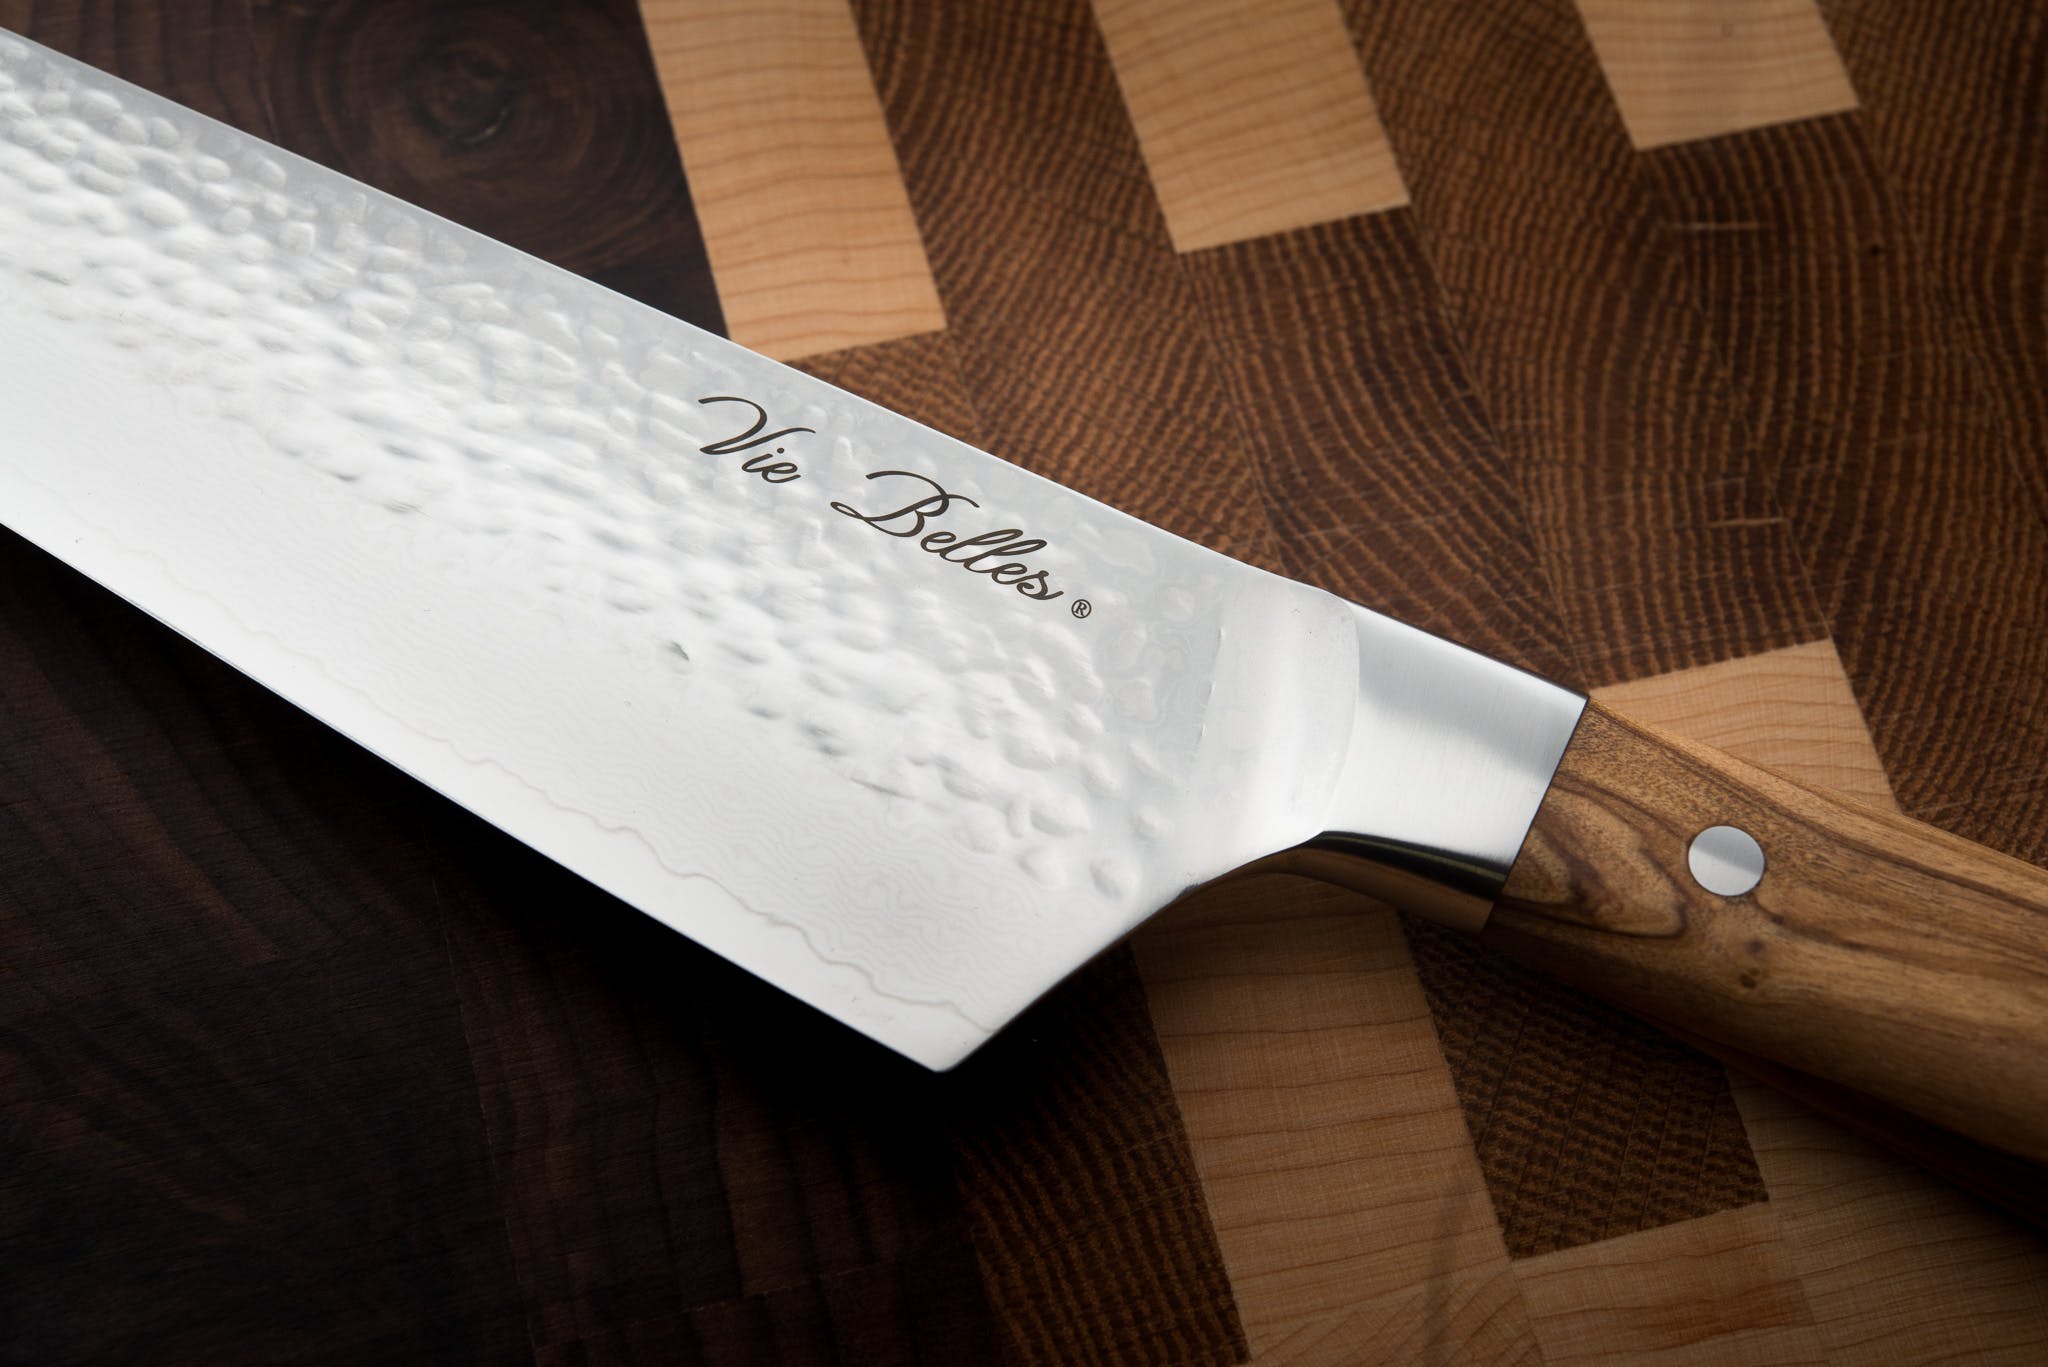 Vie Belles Cutlery: Unique Handcrafted Chef's Knives media 1